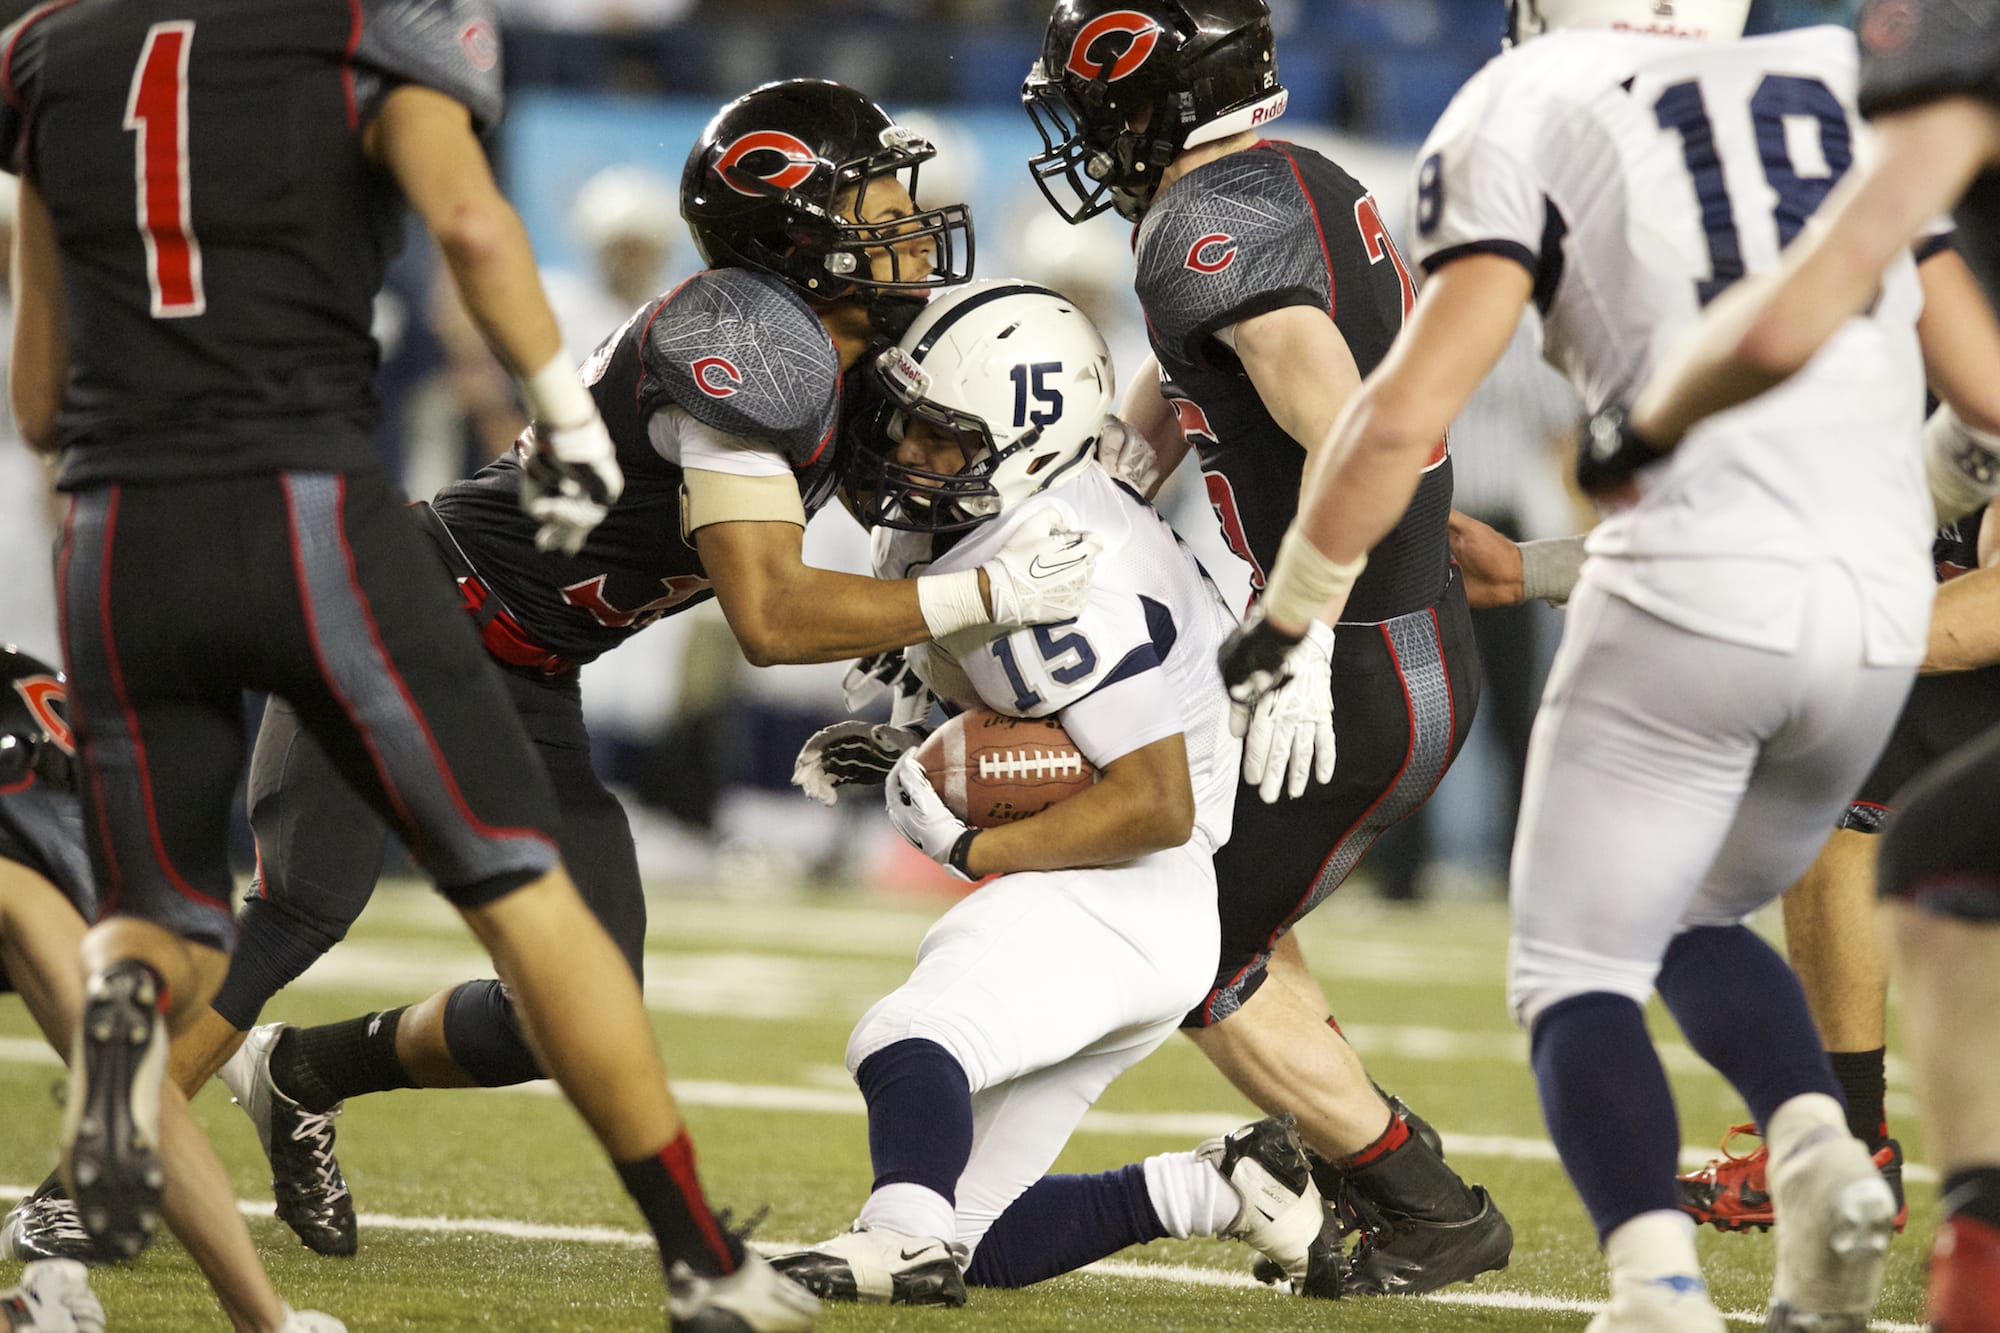 Camas and Chiawana meet again Friday after playing for the 4A state championship last season